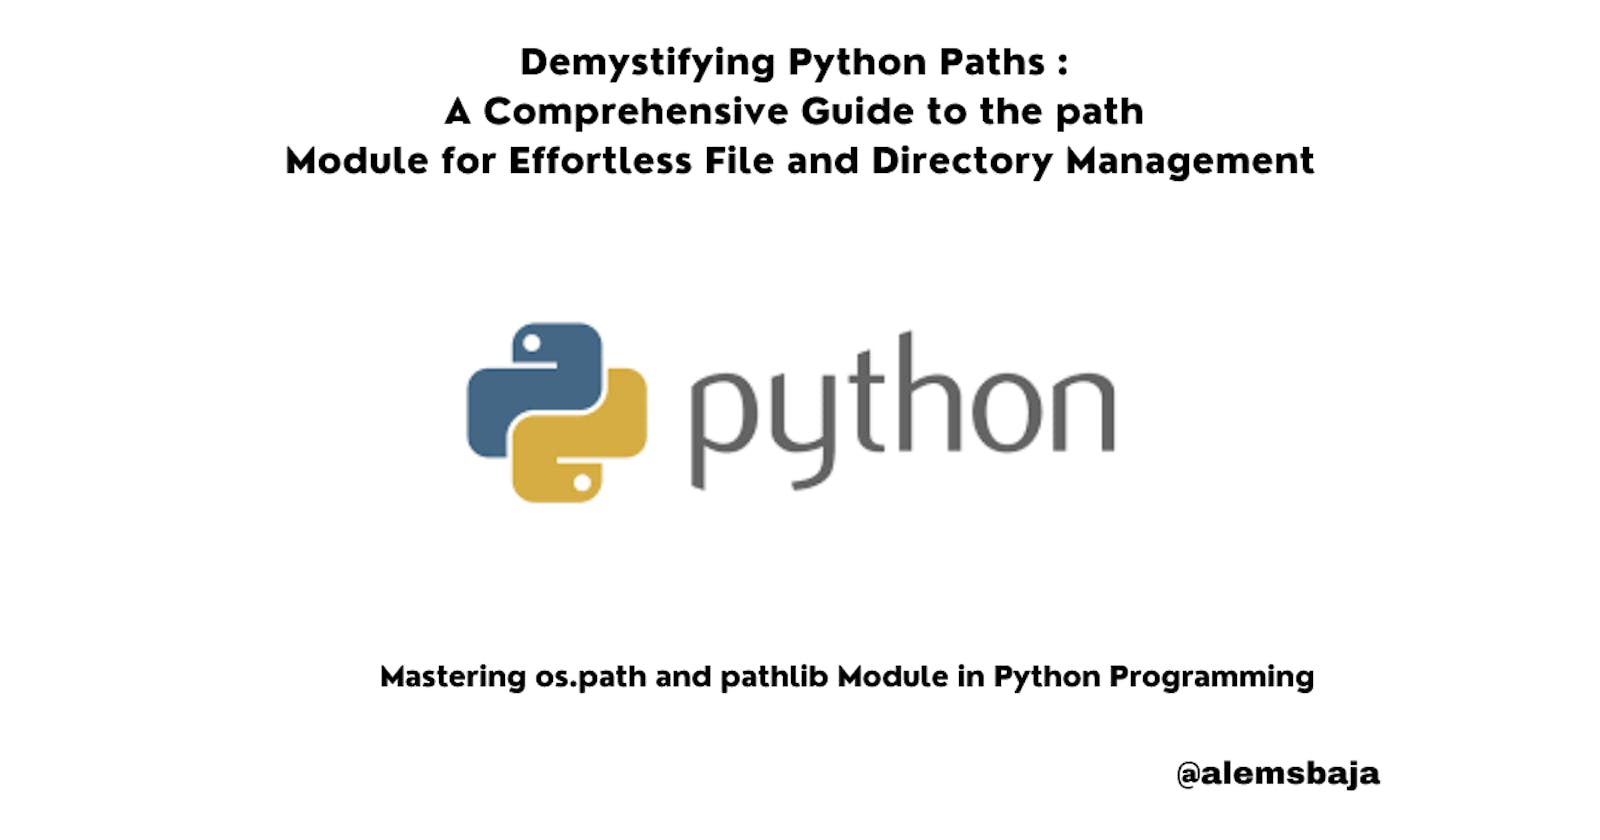 Demystifying Python Paths: A Comprehensive Guide to the path Module for Effortless File and Directory Management